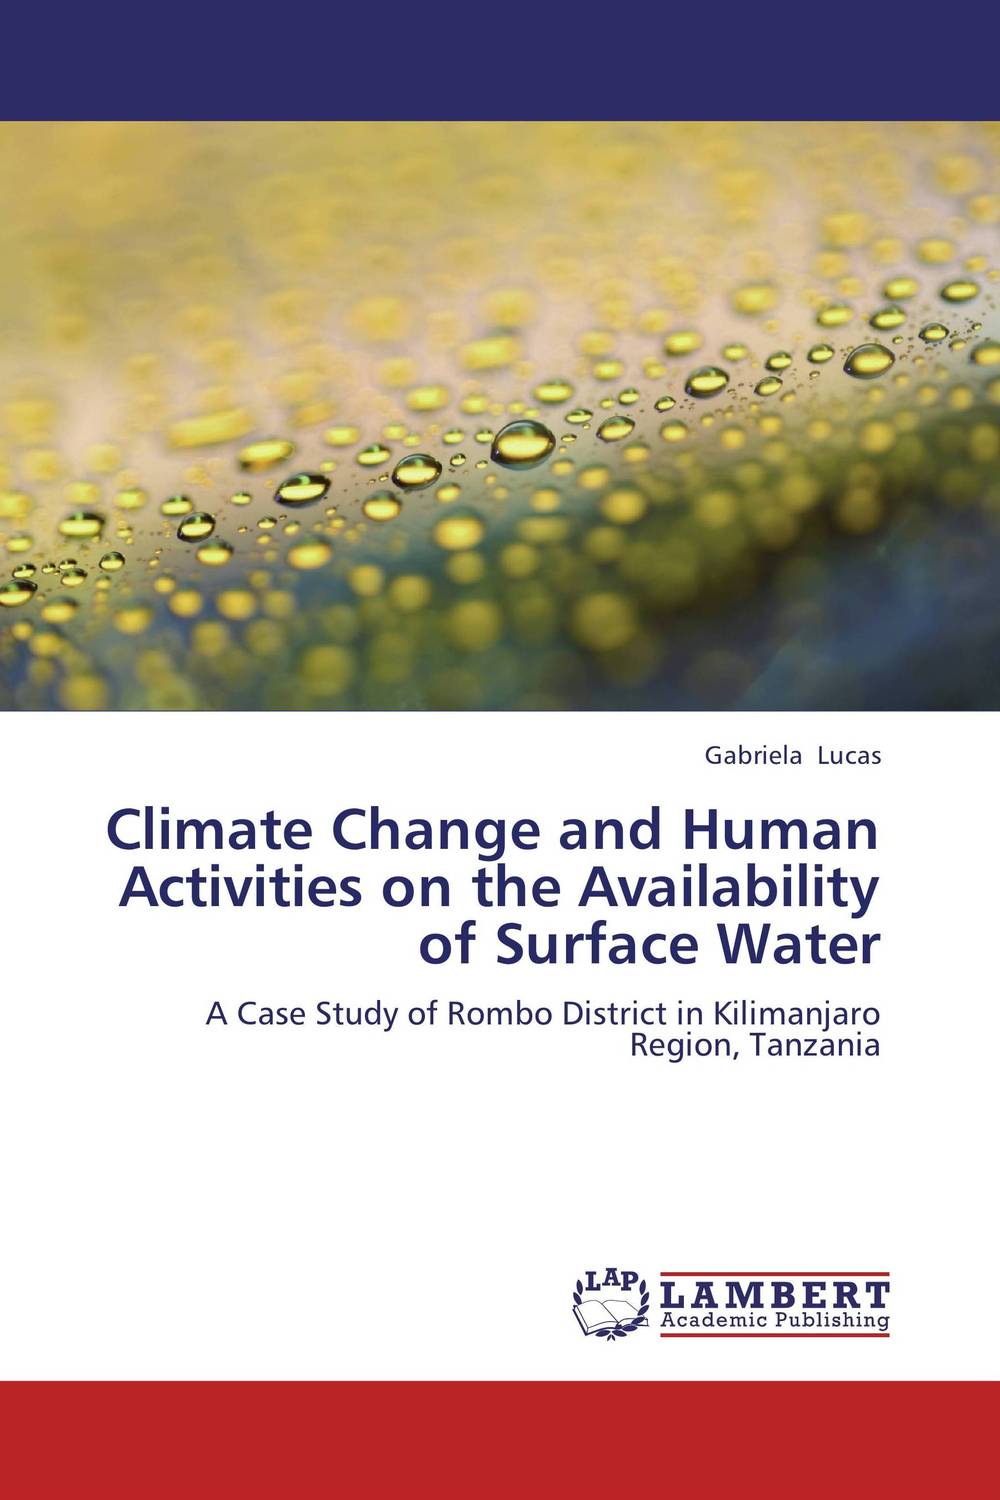 Climate Change and Human Activities on the Availability of Surface Water